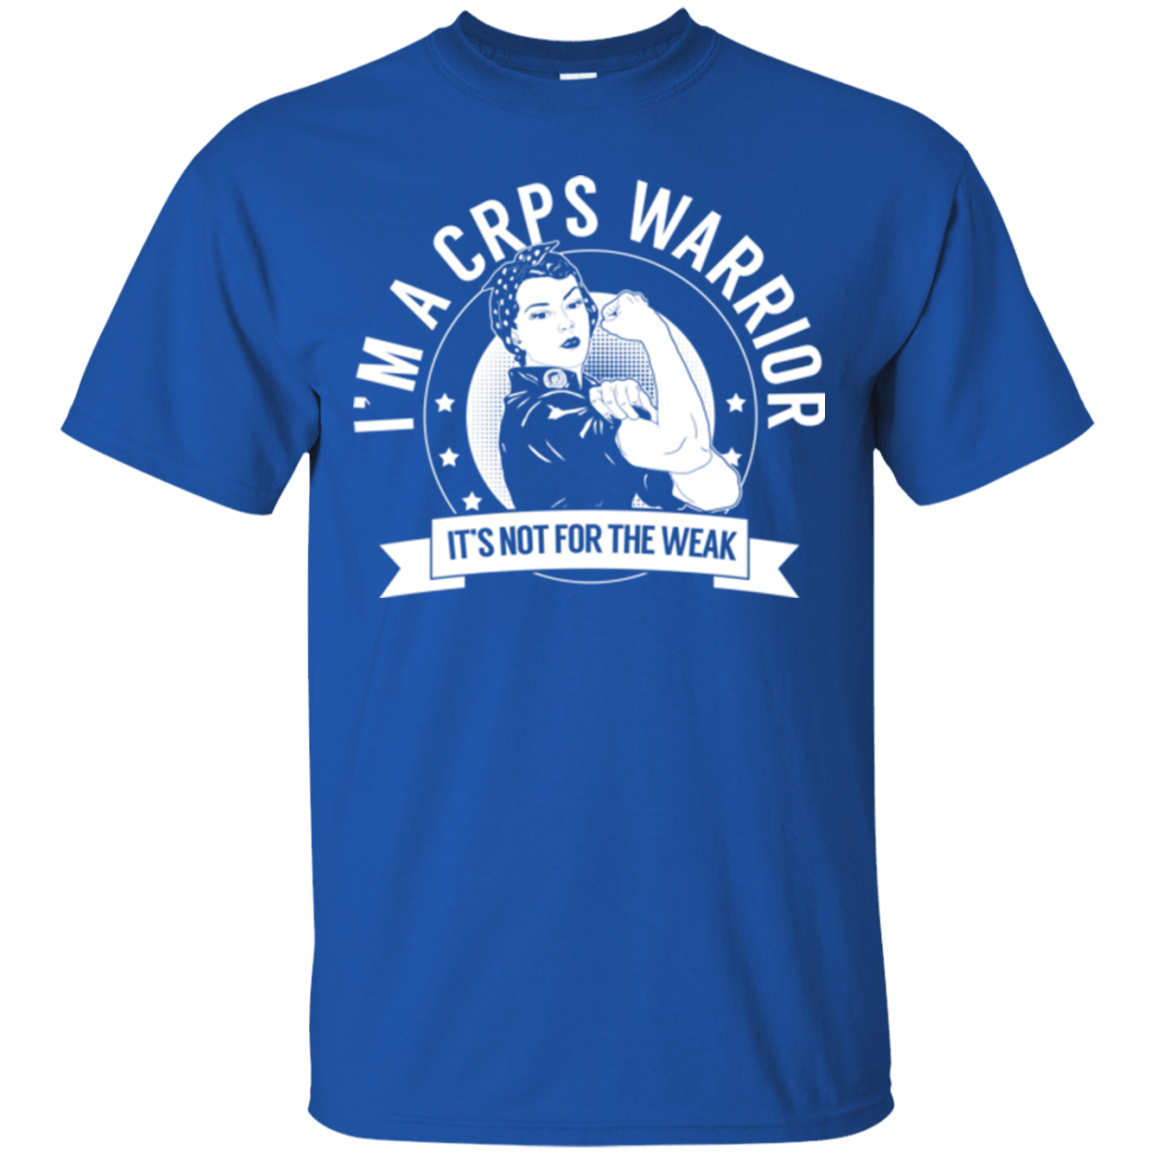 Complex Regional Pain Syndrome - CRPS Warrior Not For The Weak Unisex Shirt - The Unchargeables